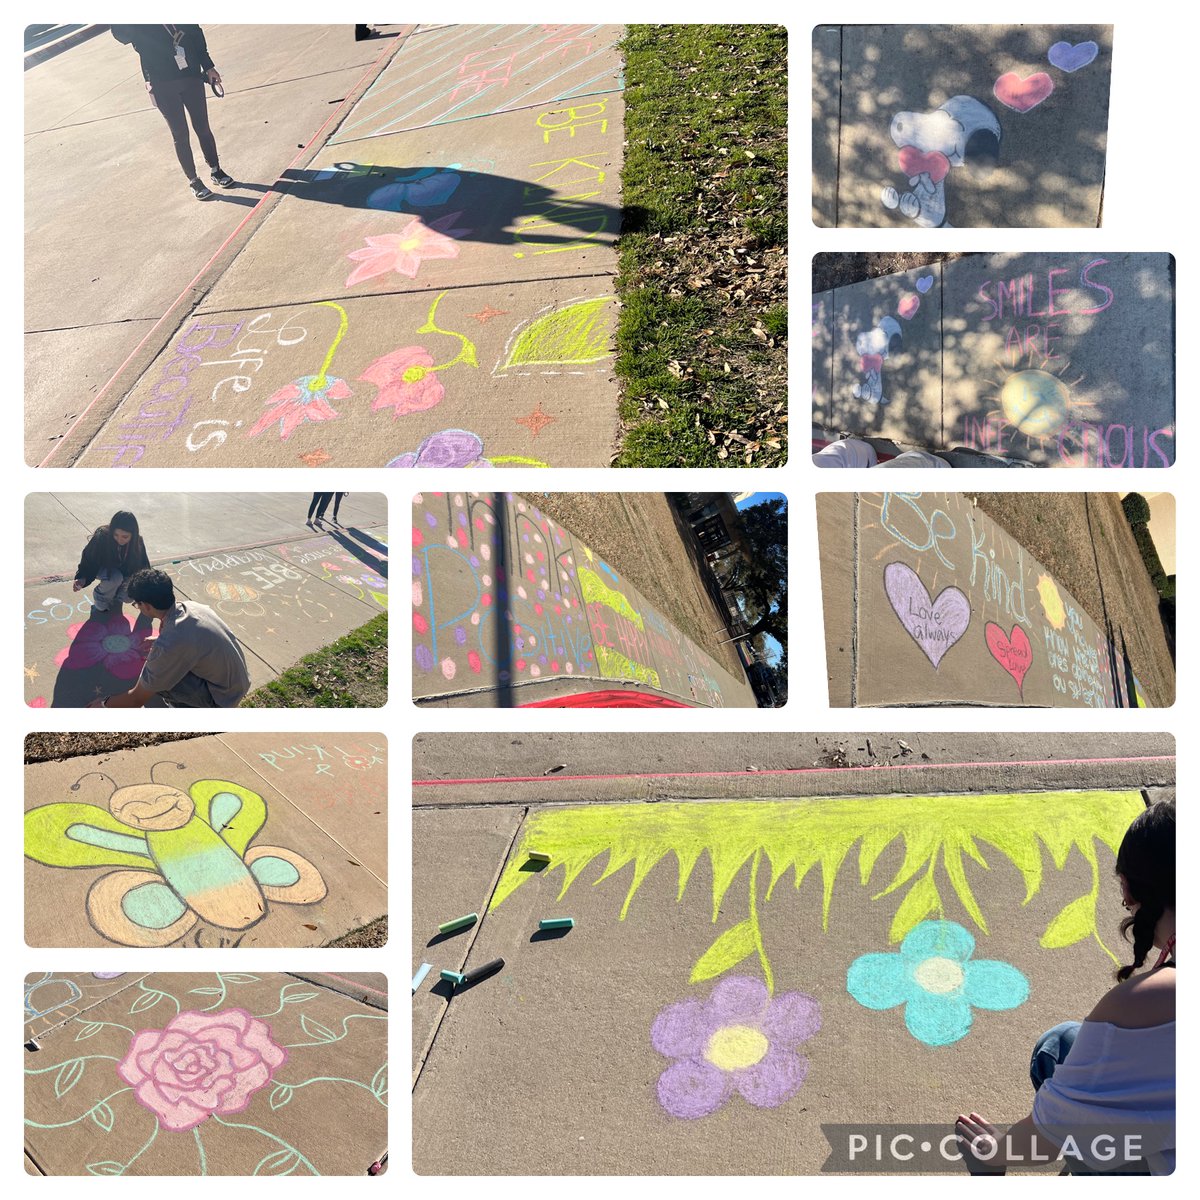 A little fresh air and positive sidewalk chalk is good for your mental health. #FeelGoodFriday